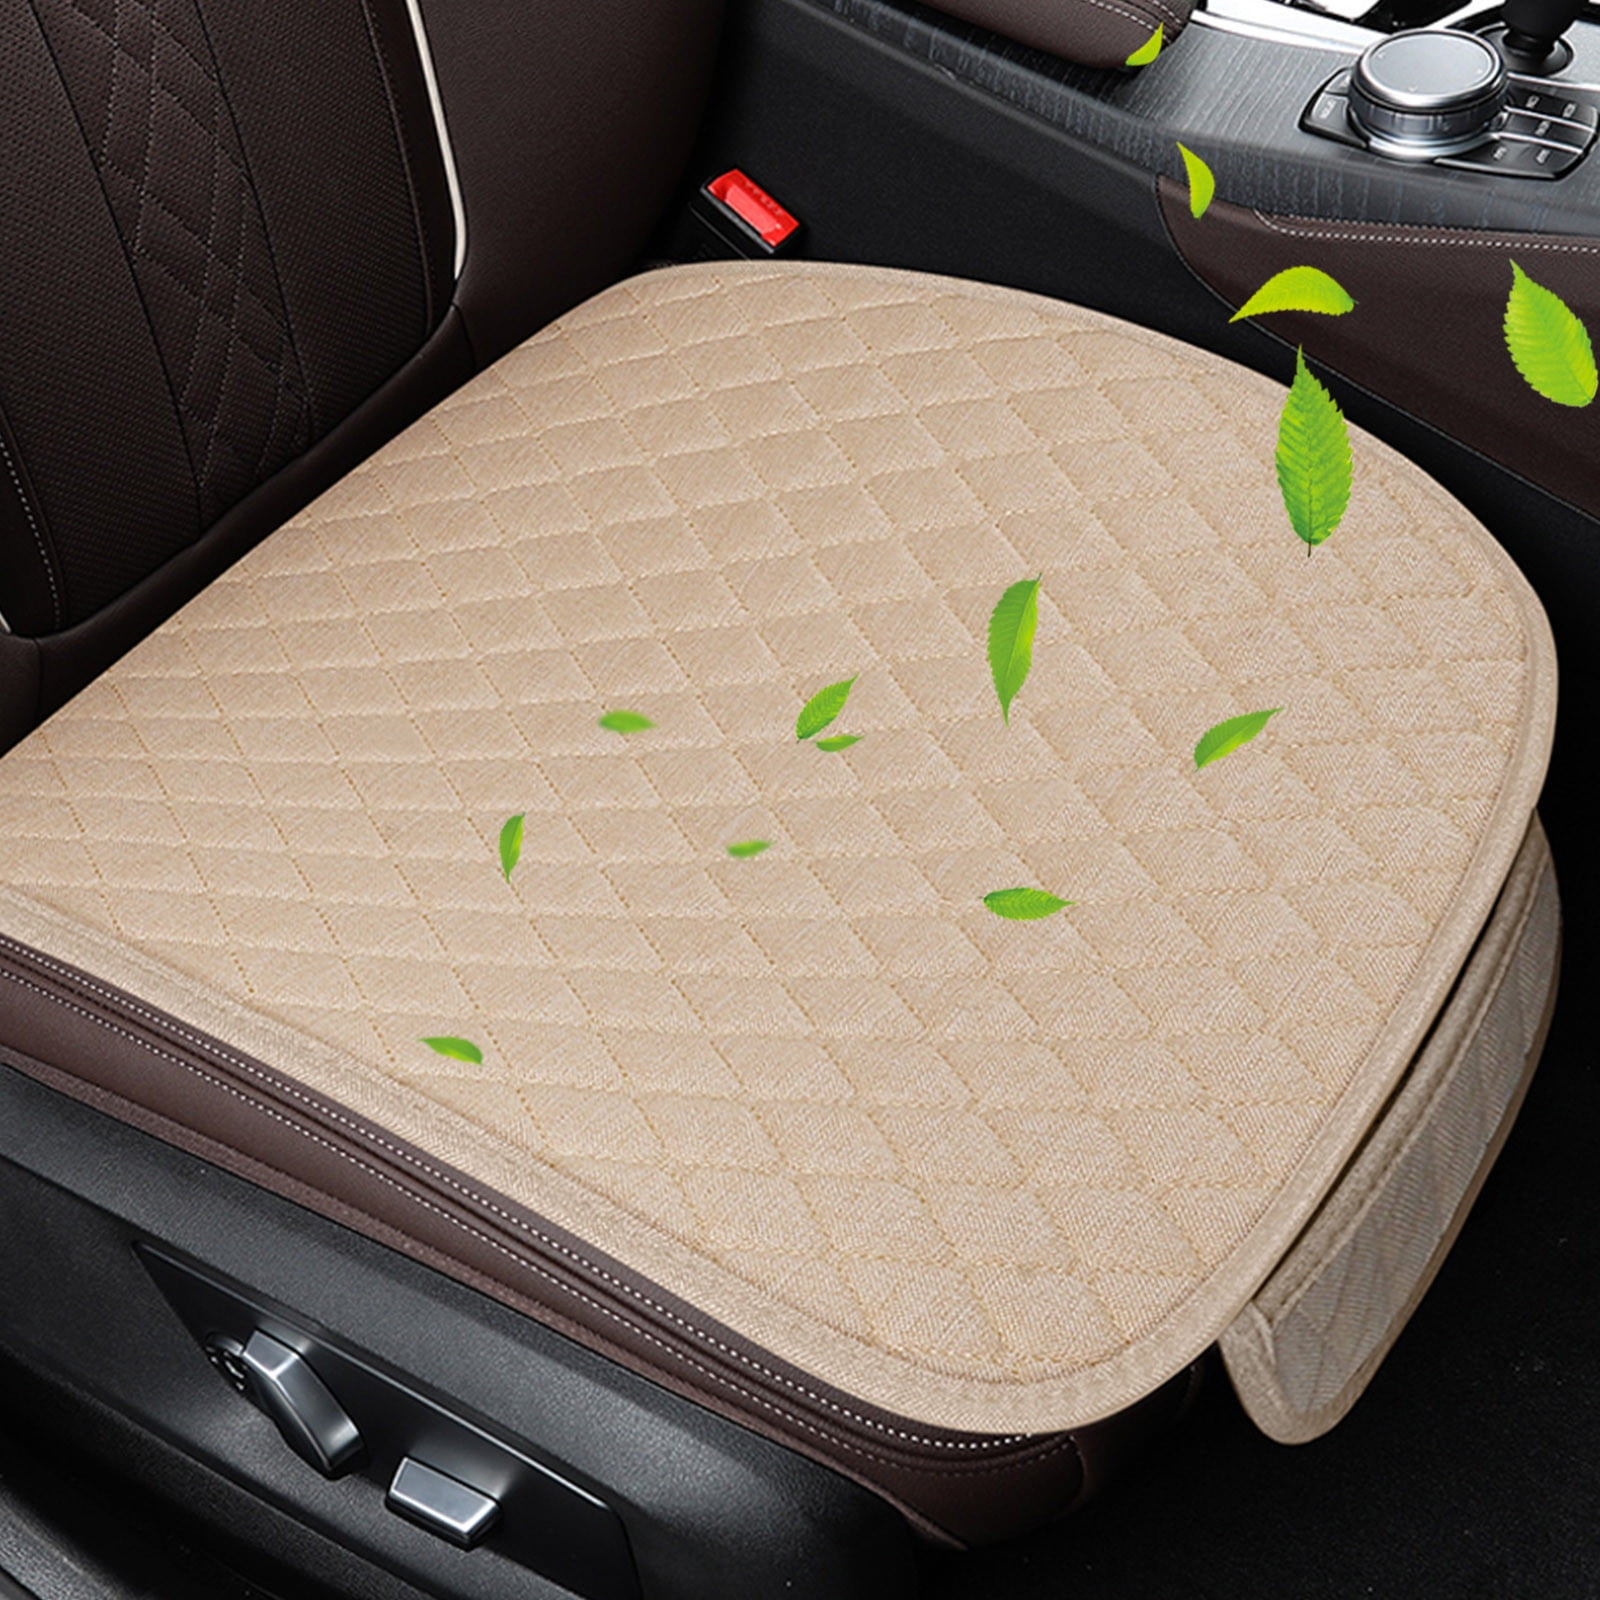 Walser Car Seat Cushions & 'Roll out' mats